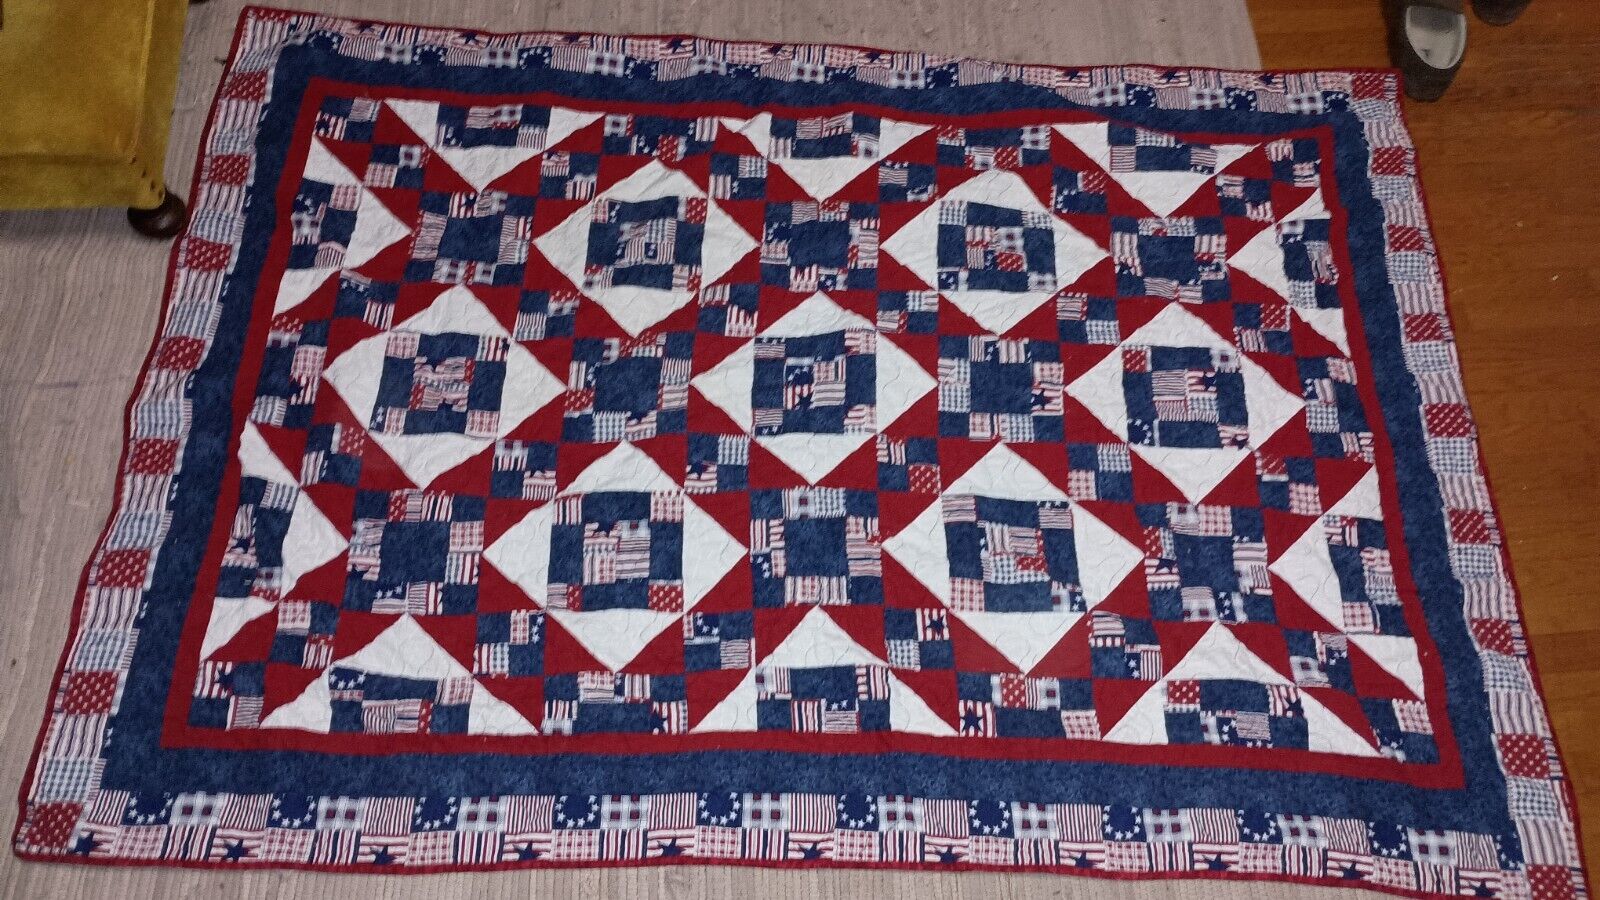  American Pacific Hancrafted Patchwork Quilt Throw Blanket 